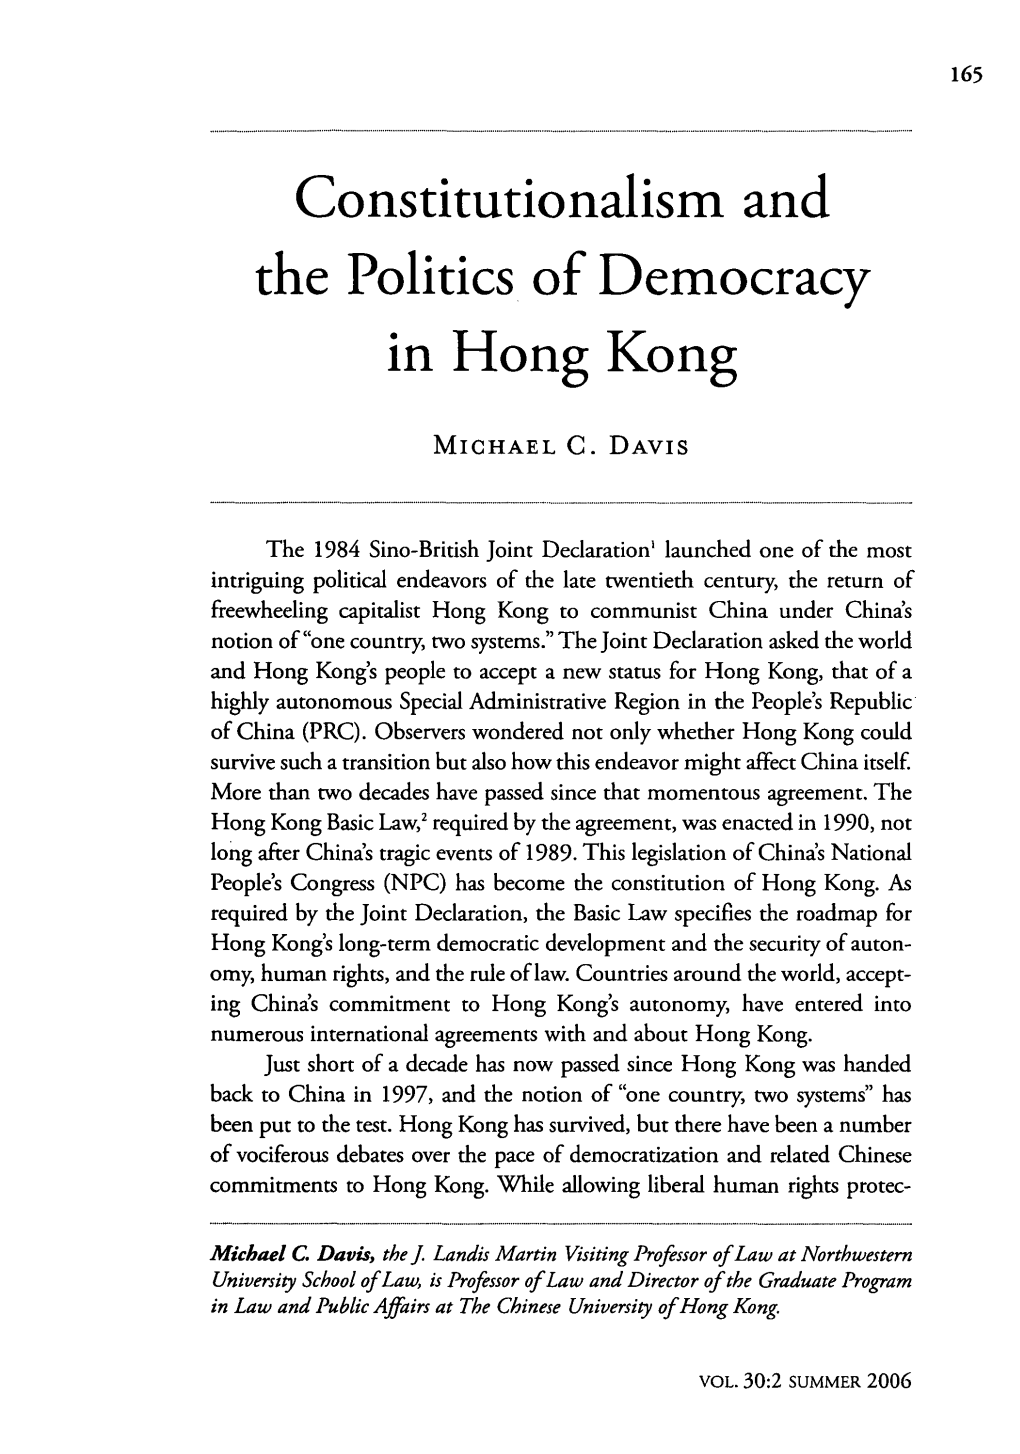 Constitutionalism and the Politics of Democracy in Hong Kong